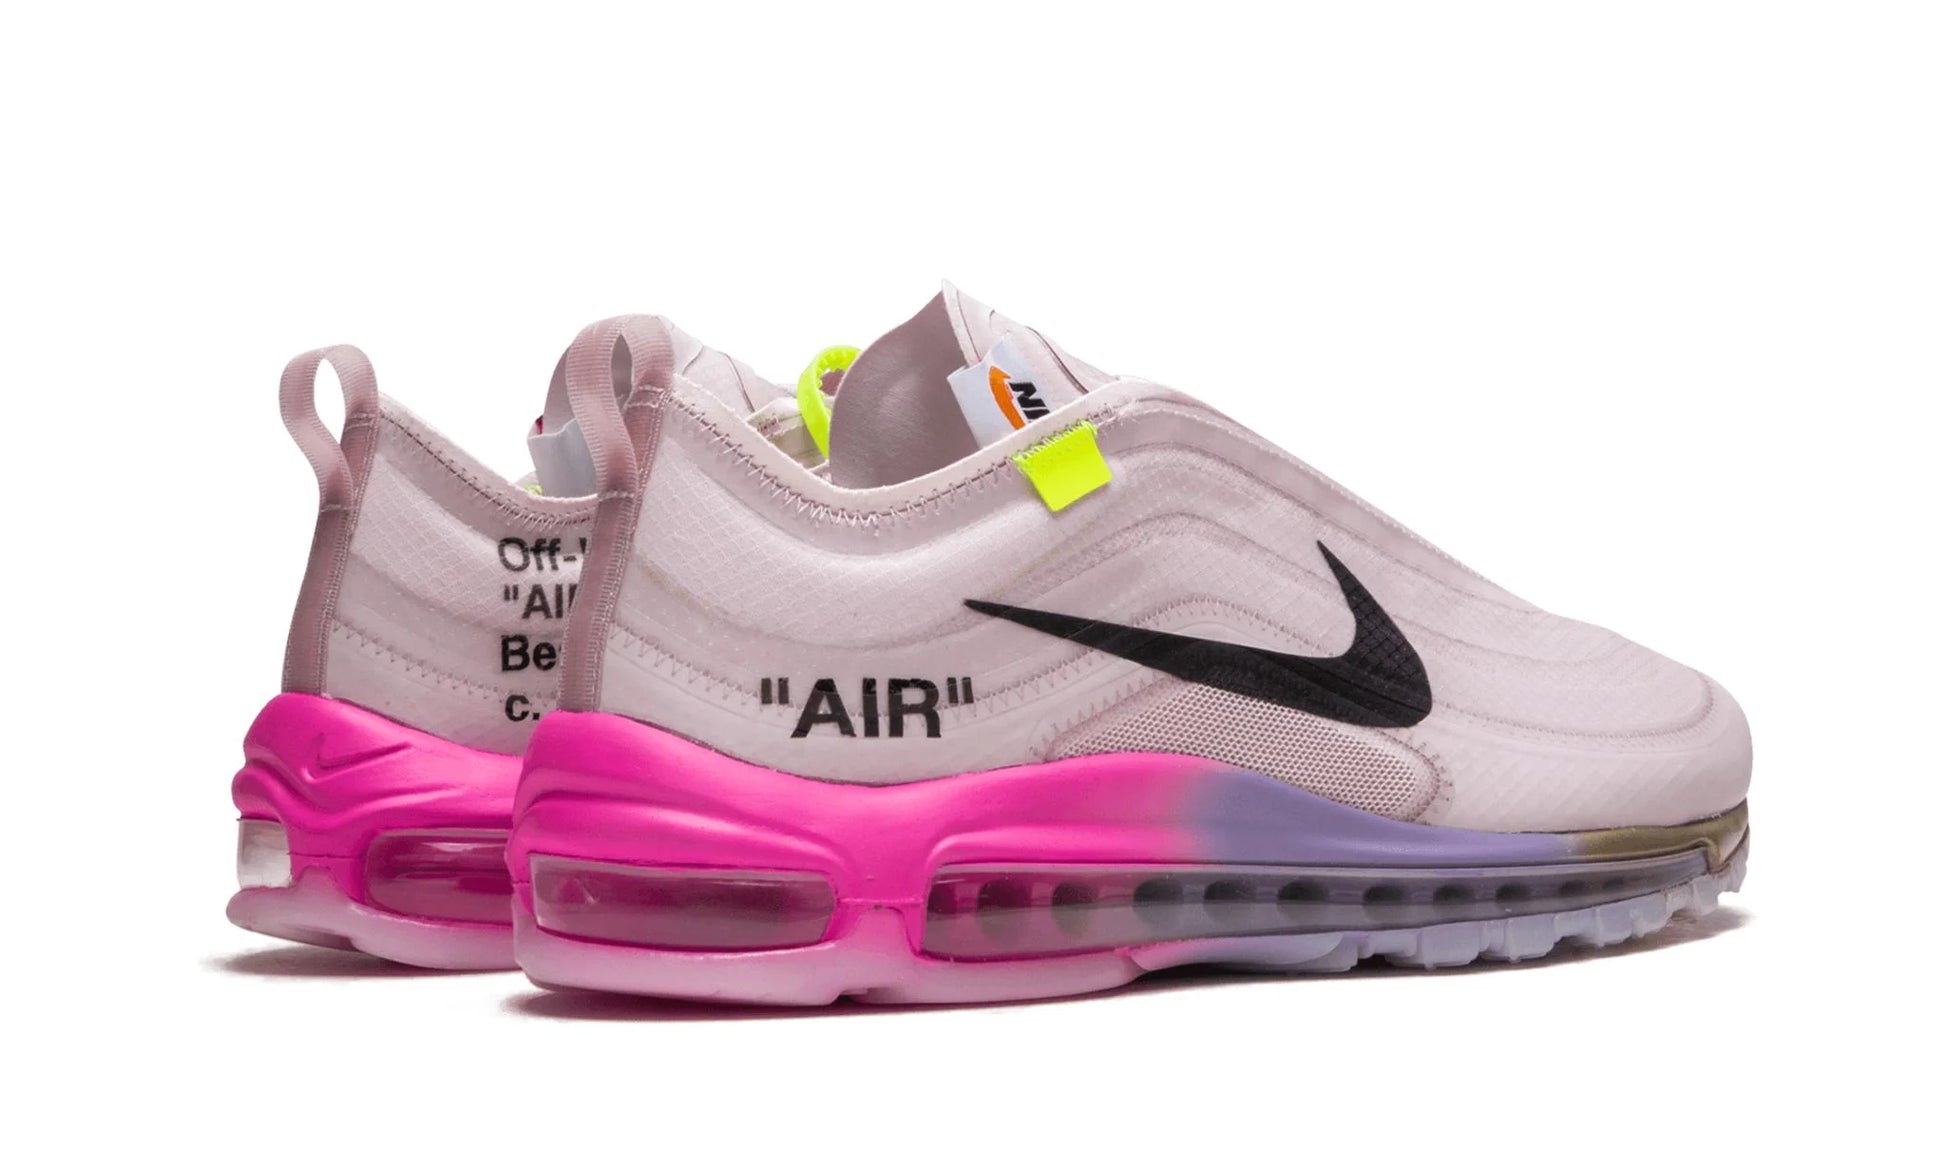 Off-White Nike Air Max 97 Serena Williams Queen Back